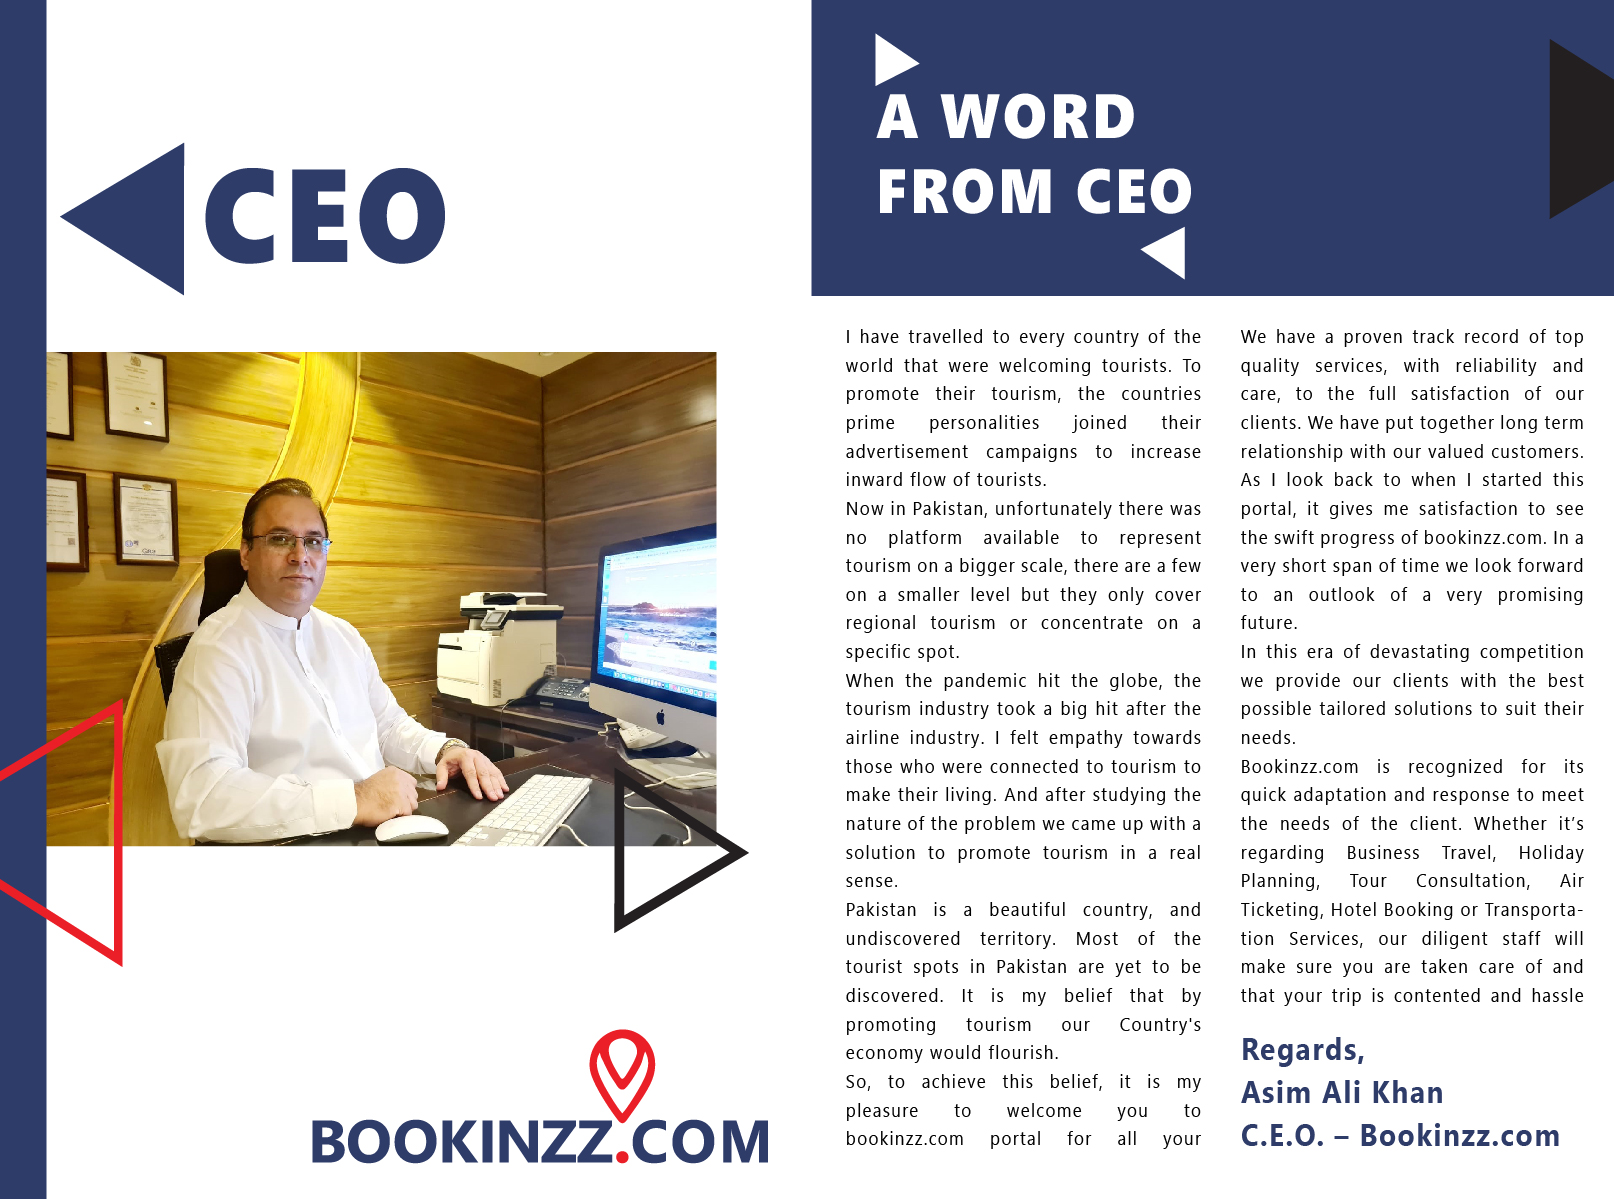 Bookinzz.com company profile a word from CEO